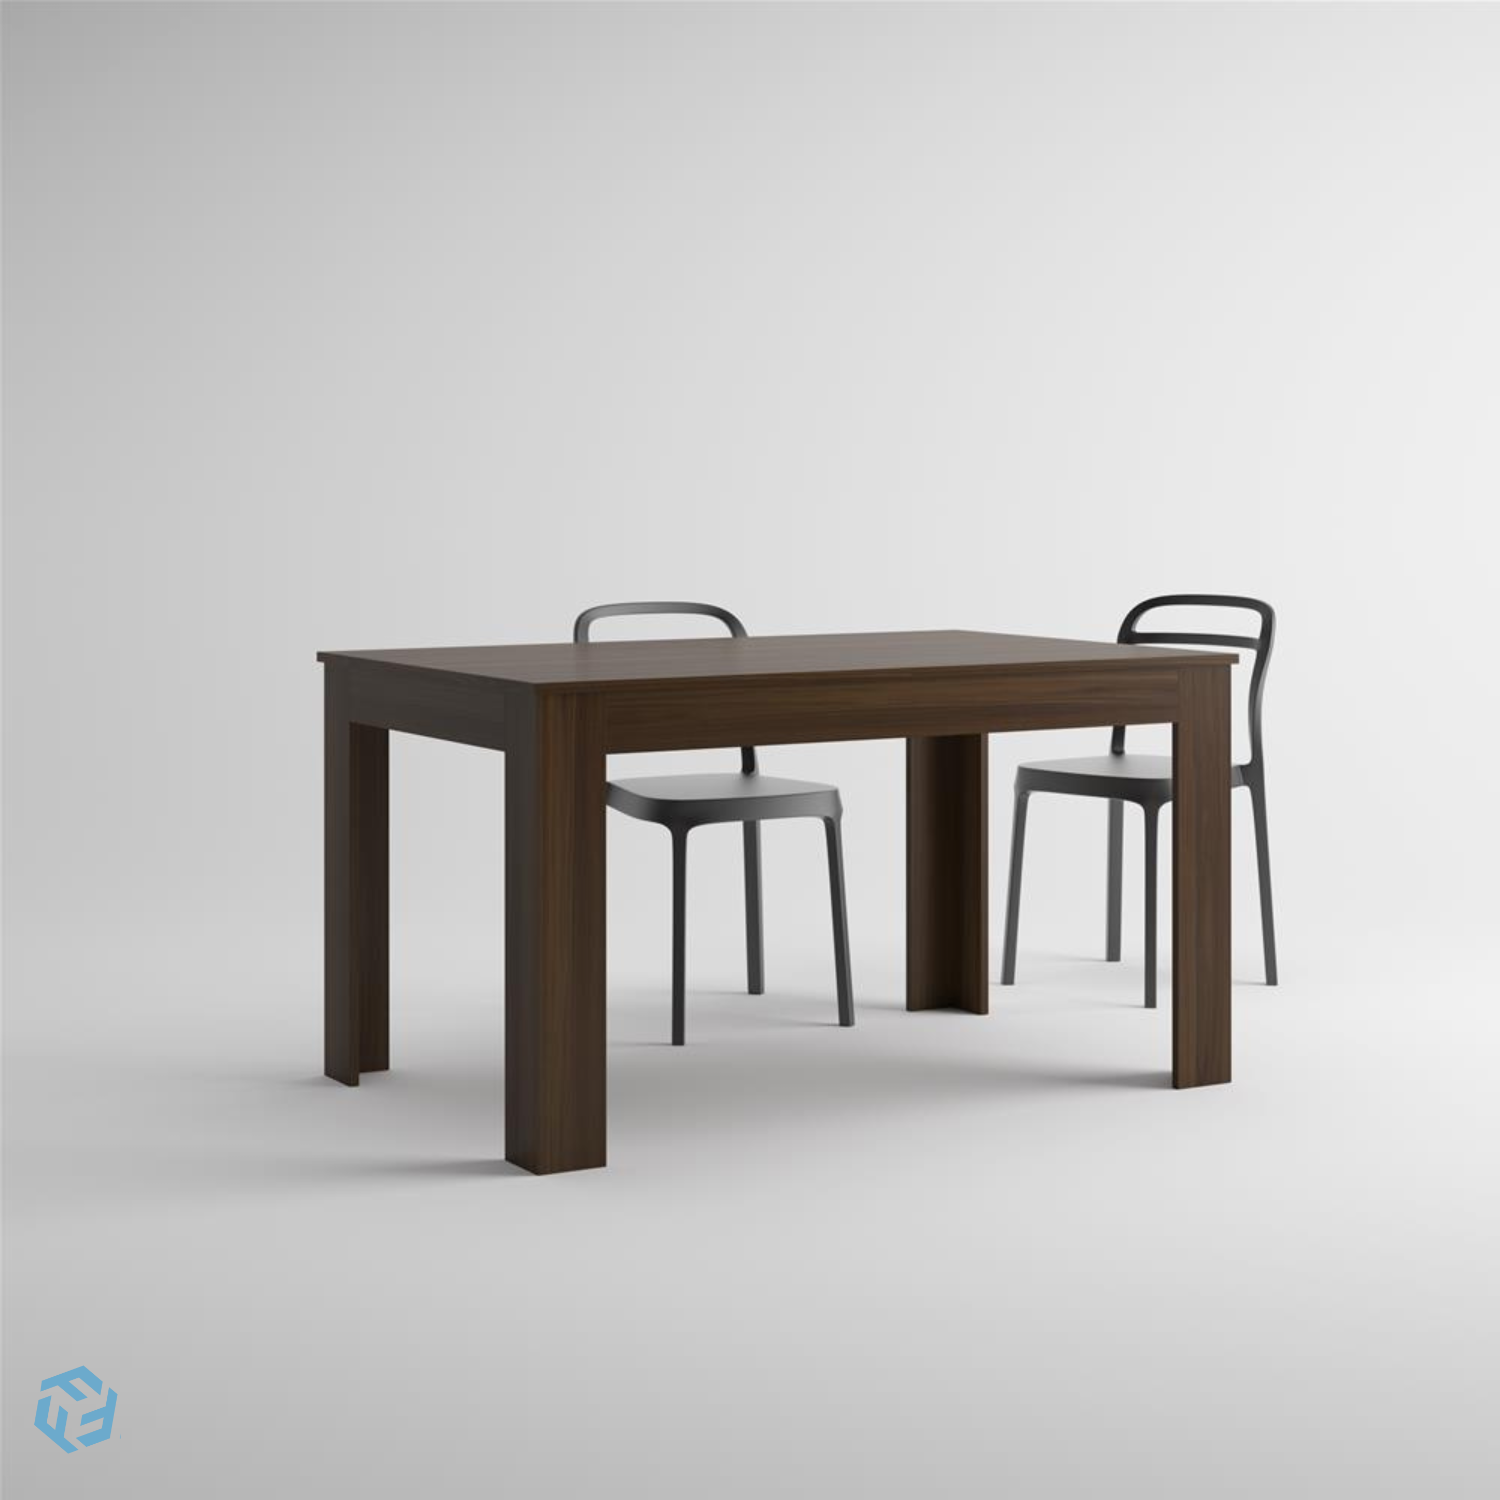 Albacete dining table